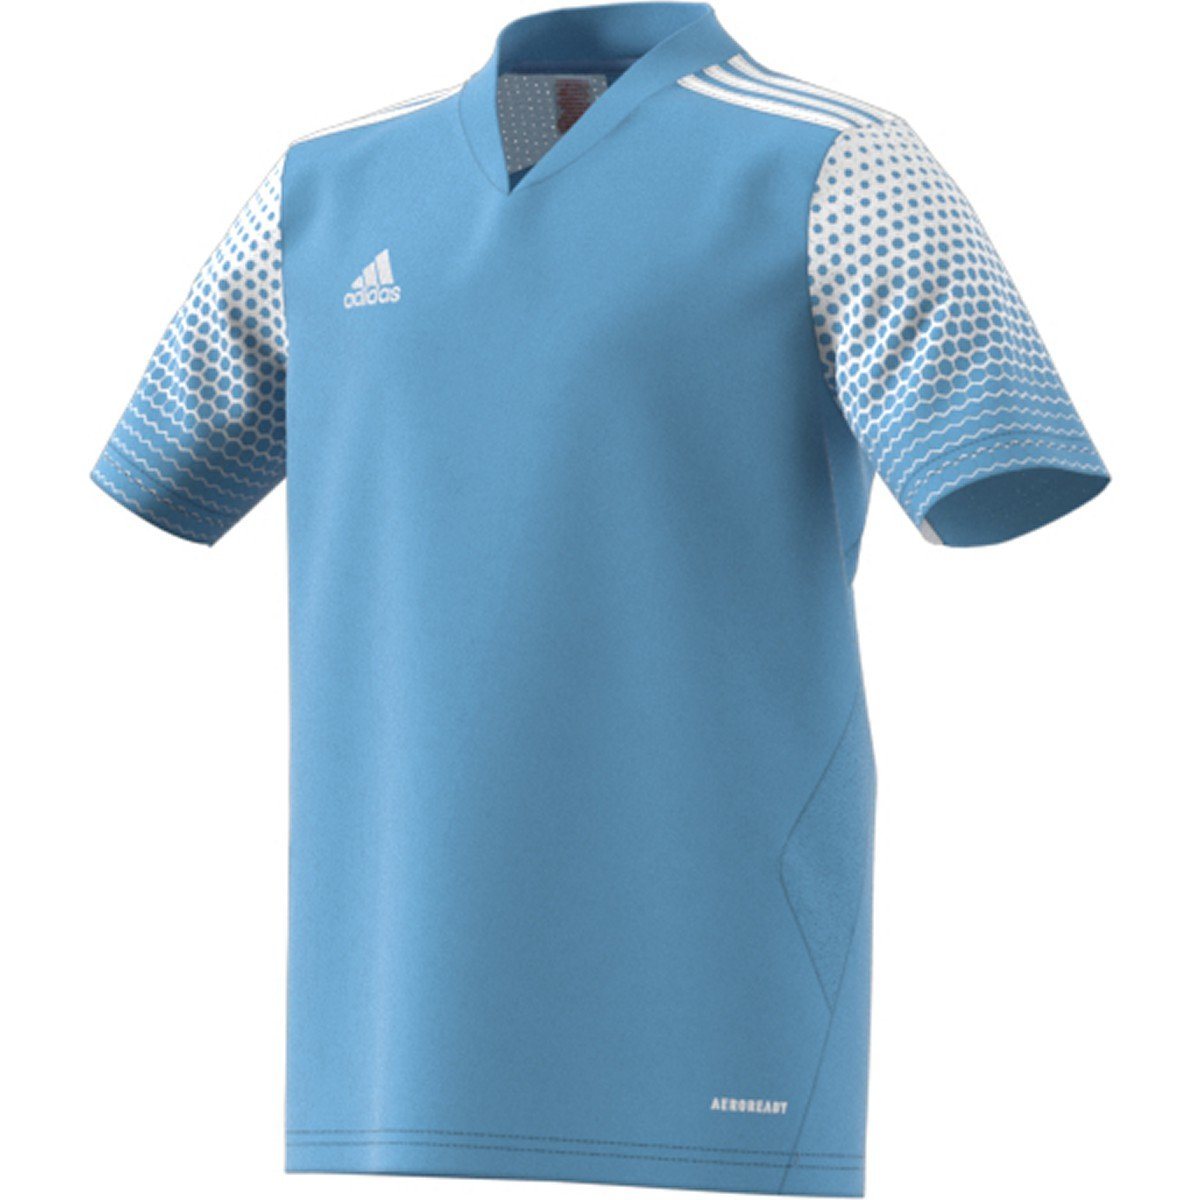 adidas Youth Regista 20 Jersey Jersey Adidas Youth 2X-Small team light blue/white 